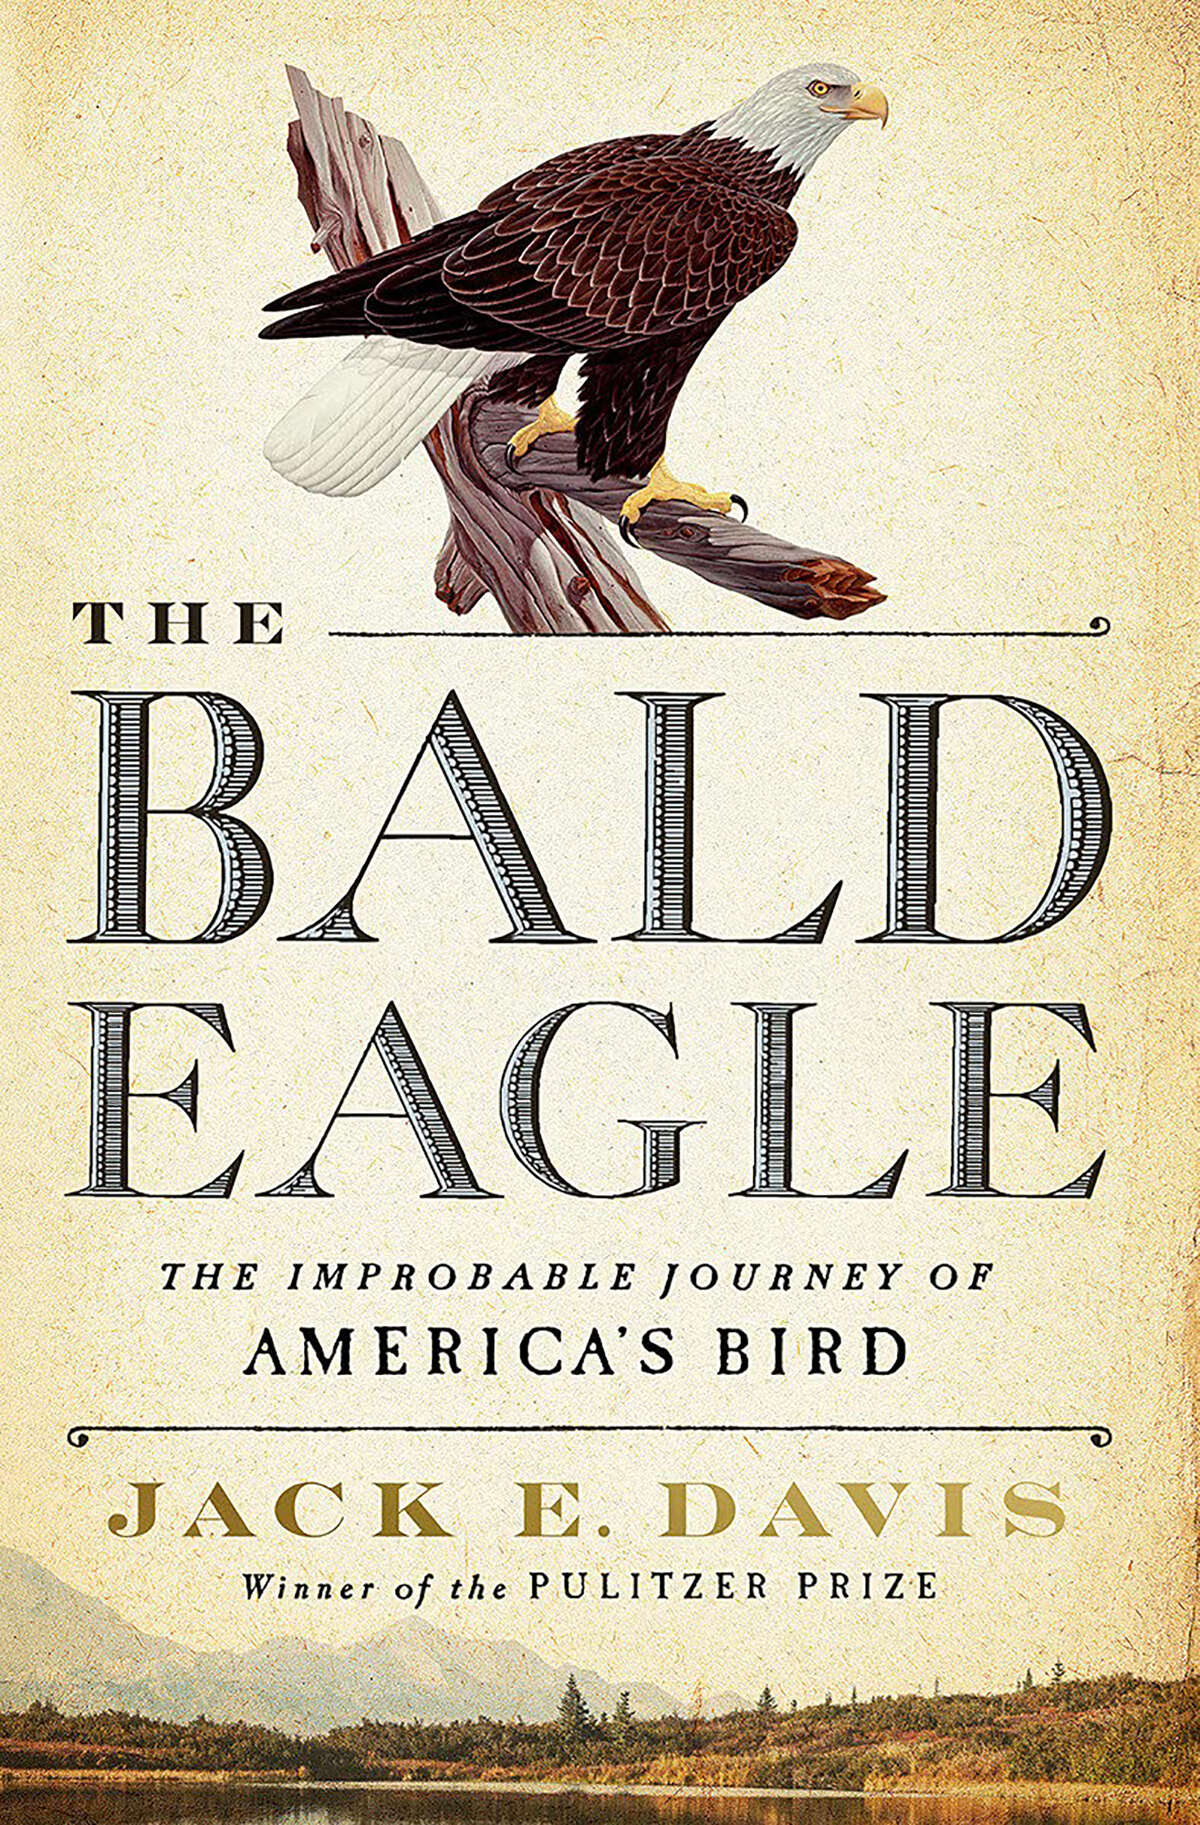 "The Bald Eagle: The Improbable Journey of America's Bird"